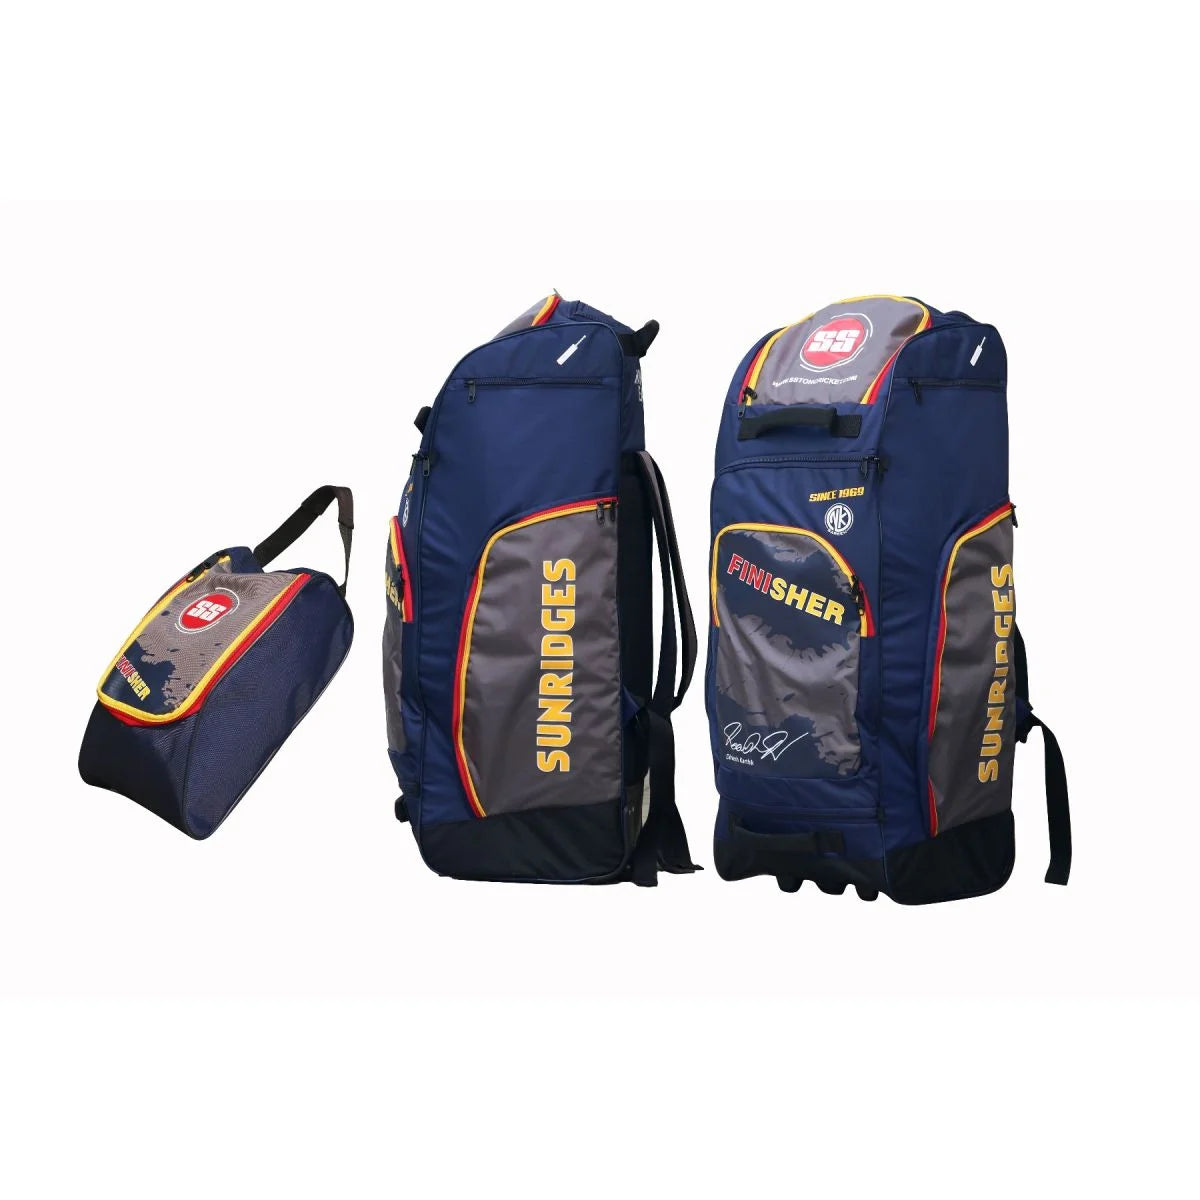 SS DK Finisher duffle Cricket Kit Bag with shoes bag